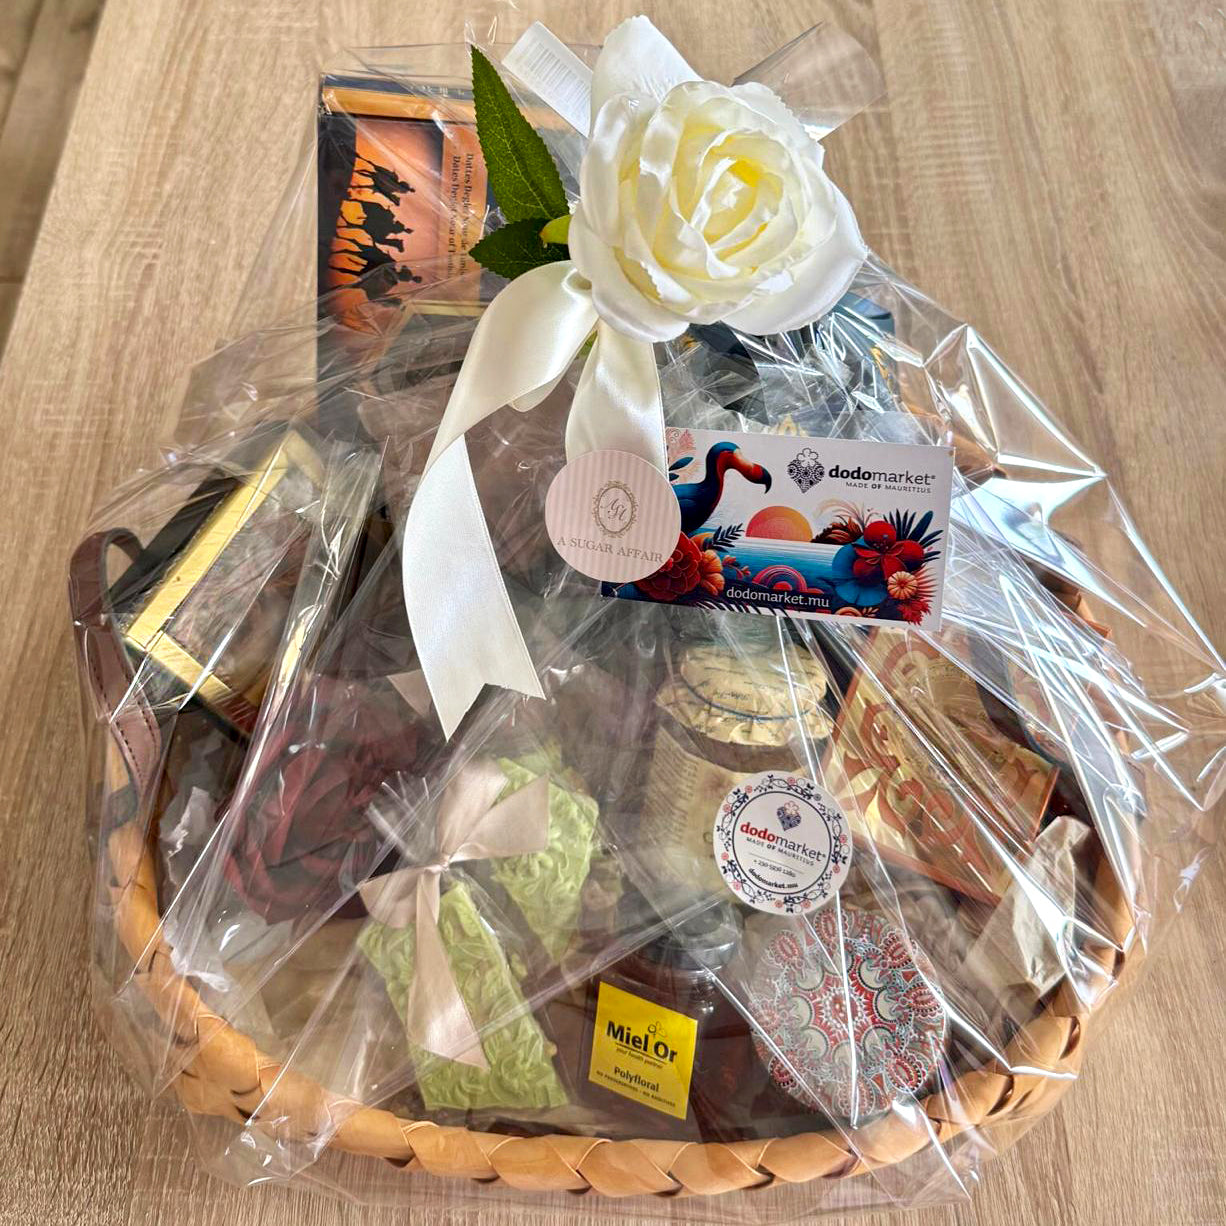 Mabrouk-Gift-Hamper-Deluxe-wrapped-Dodomarket-delivery-Mauritius